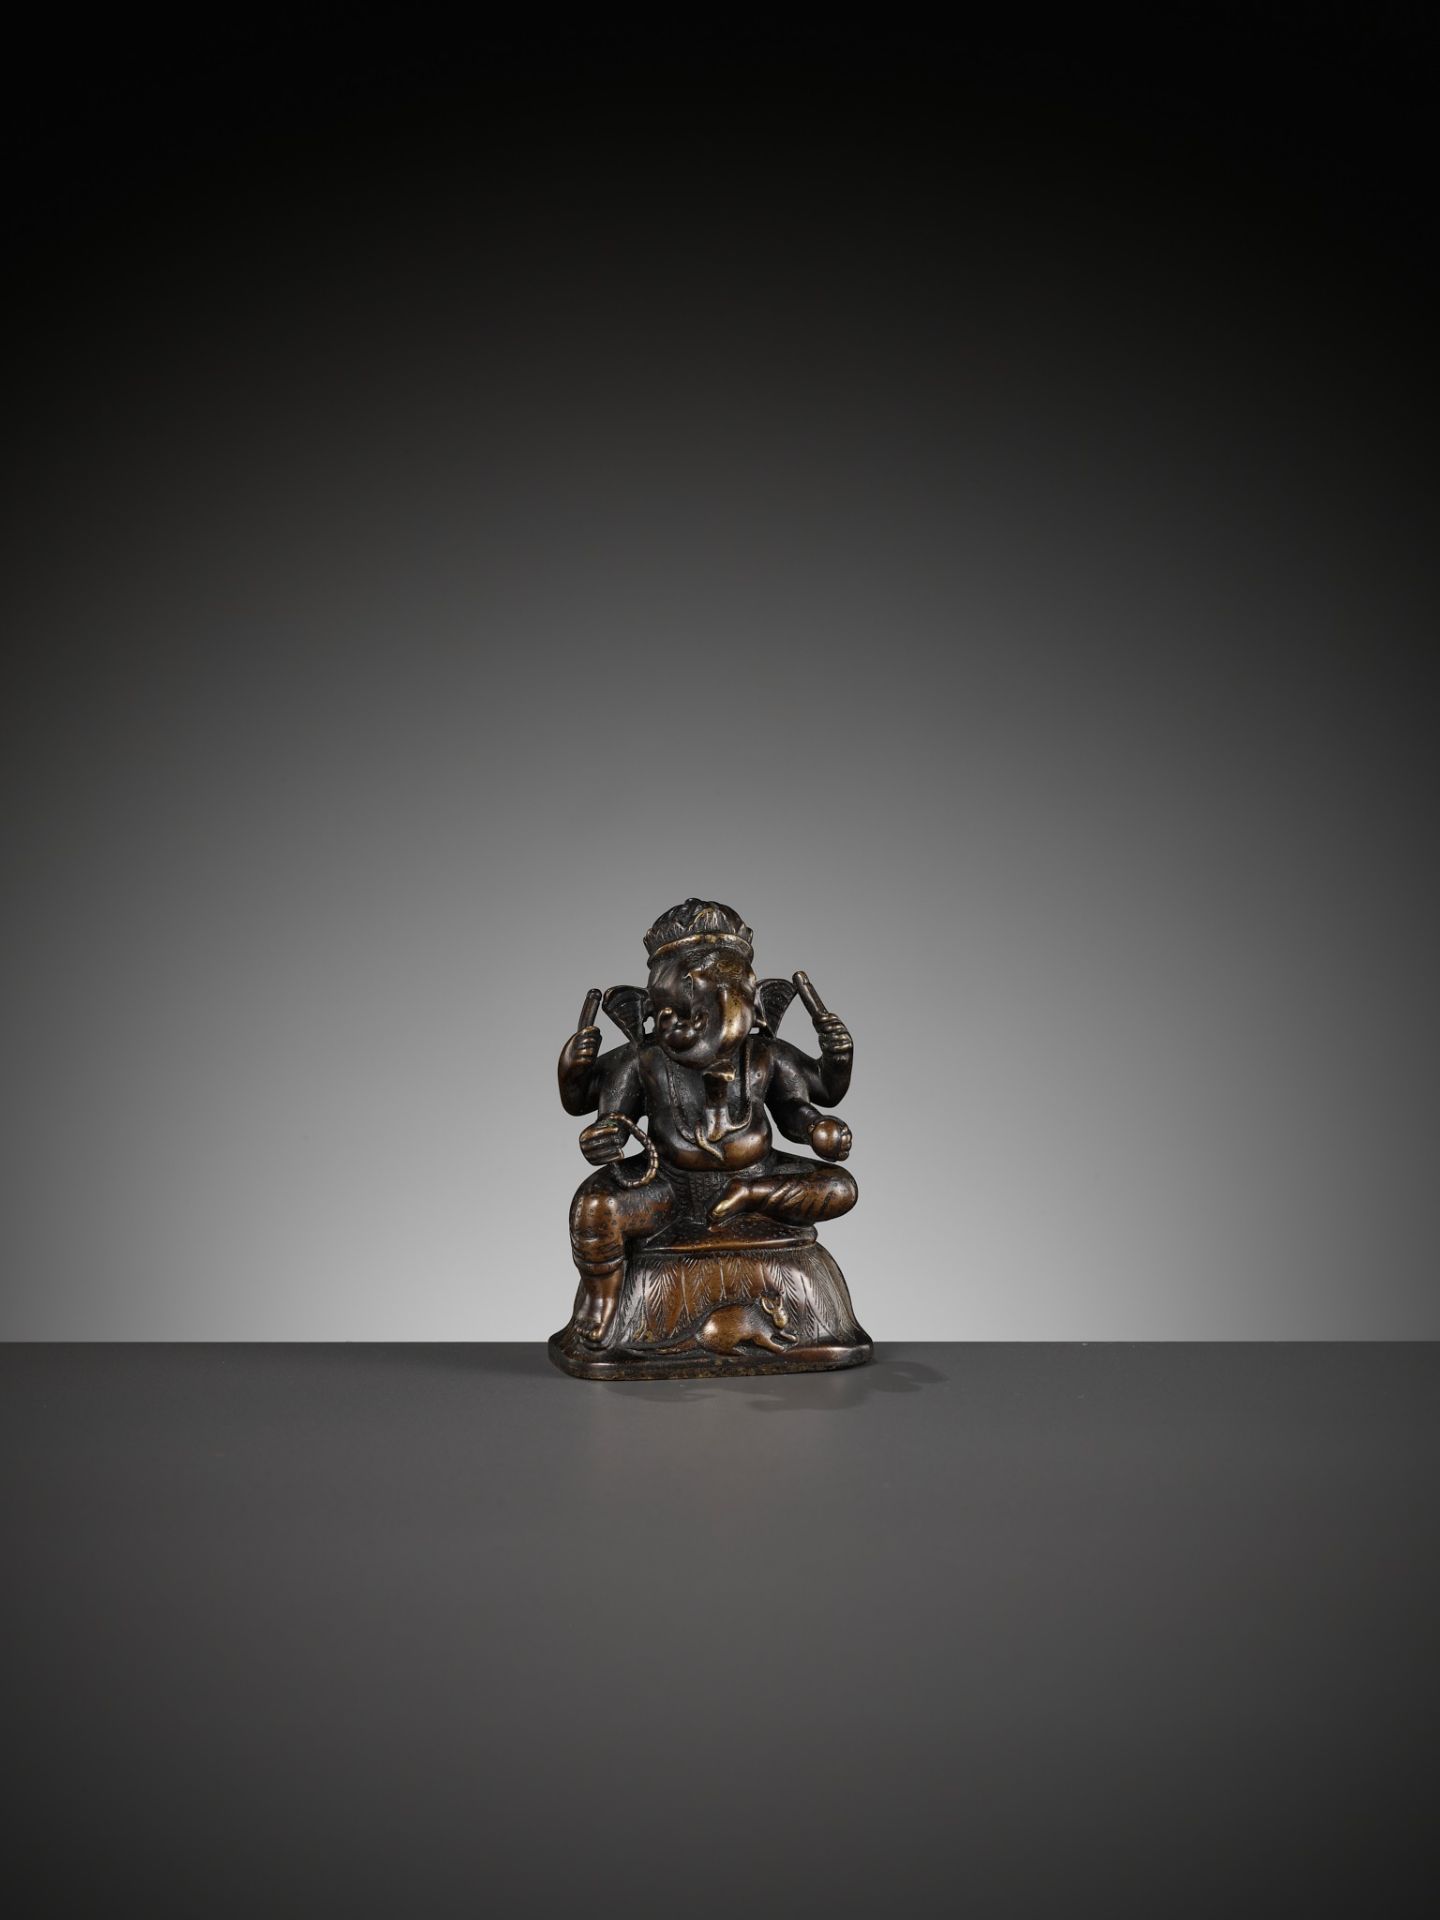 A SMALL BRONZE FIGURE OF GANESHA, SOUTH INDIA, 17TH - 18TH CENTURY - Image 13 of 14